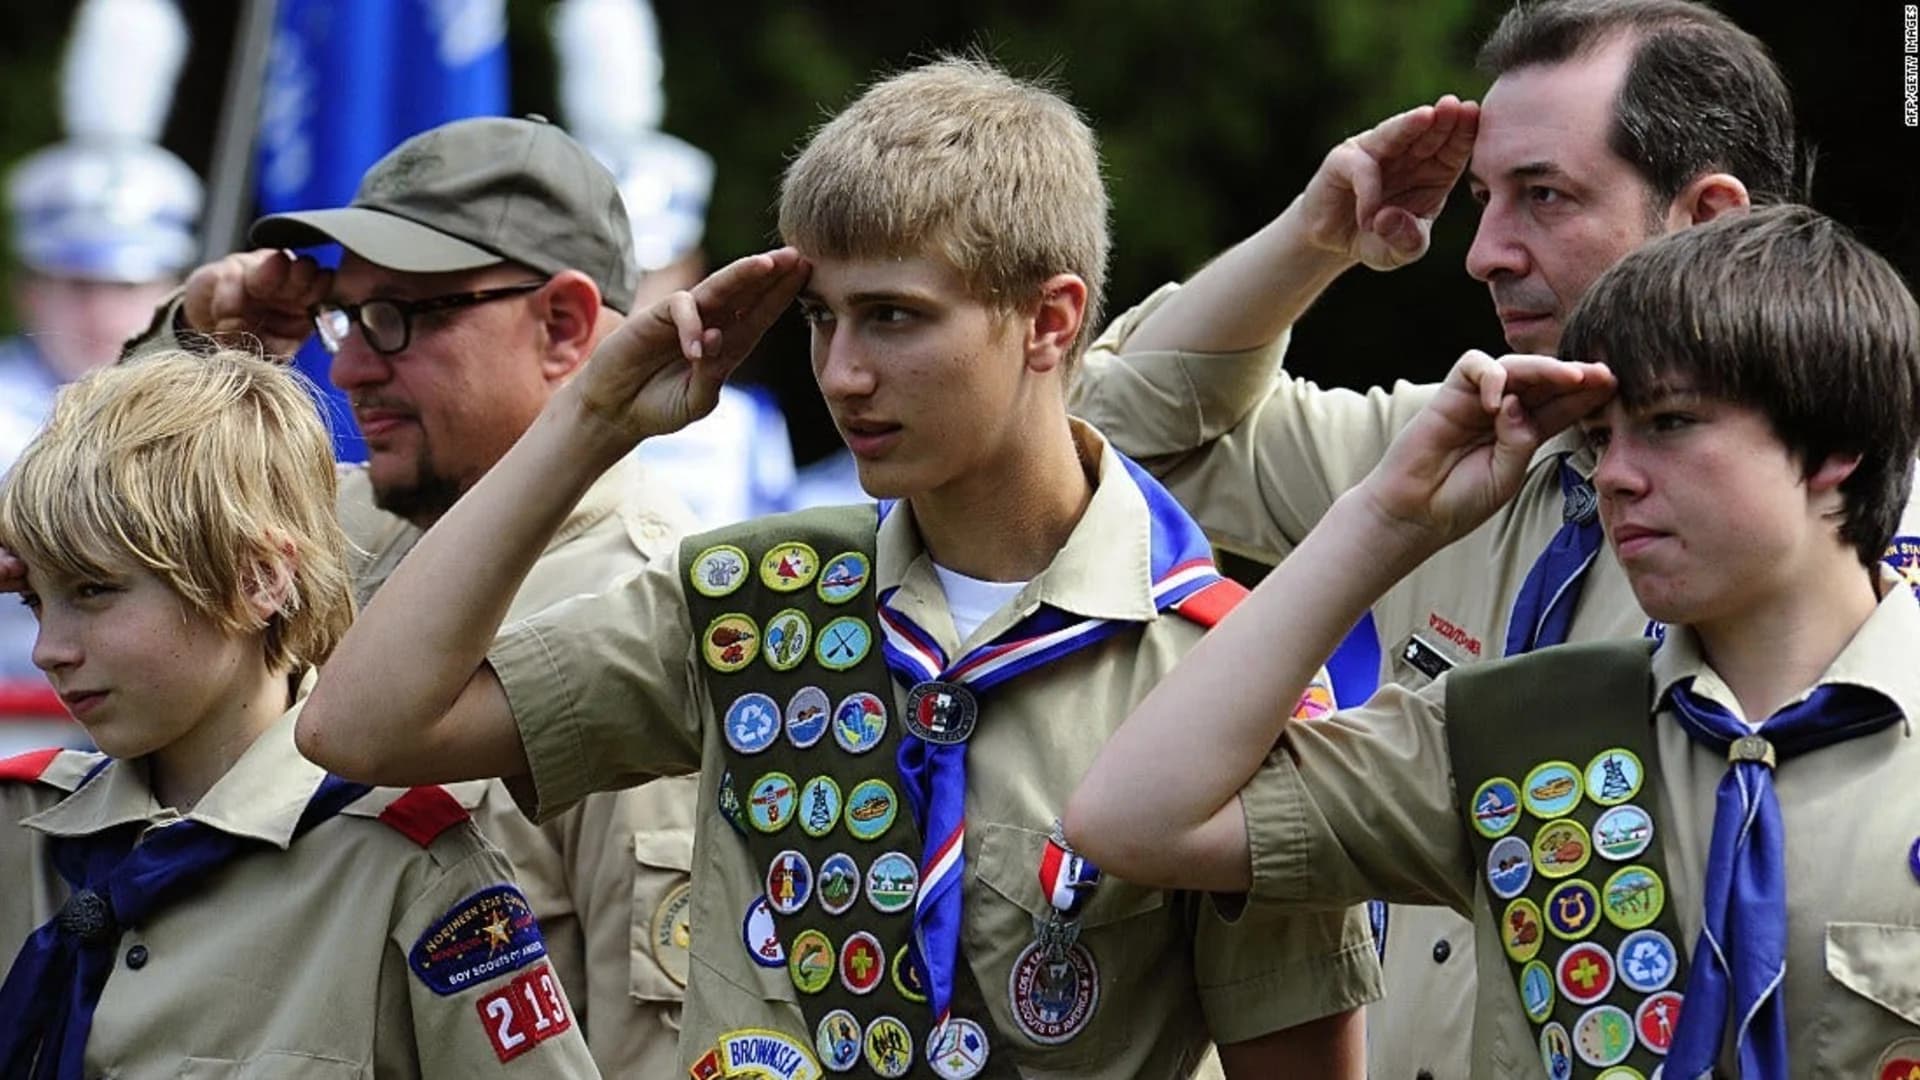 In historic change, Boy Scouts to let girls in some programs